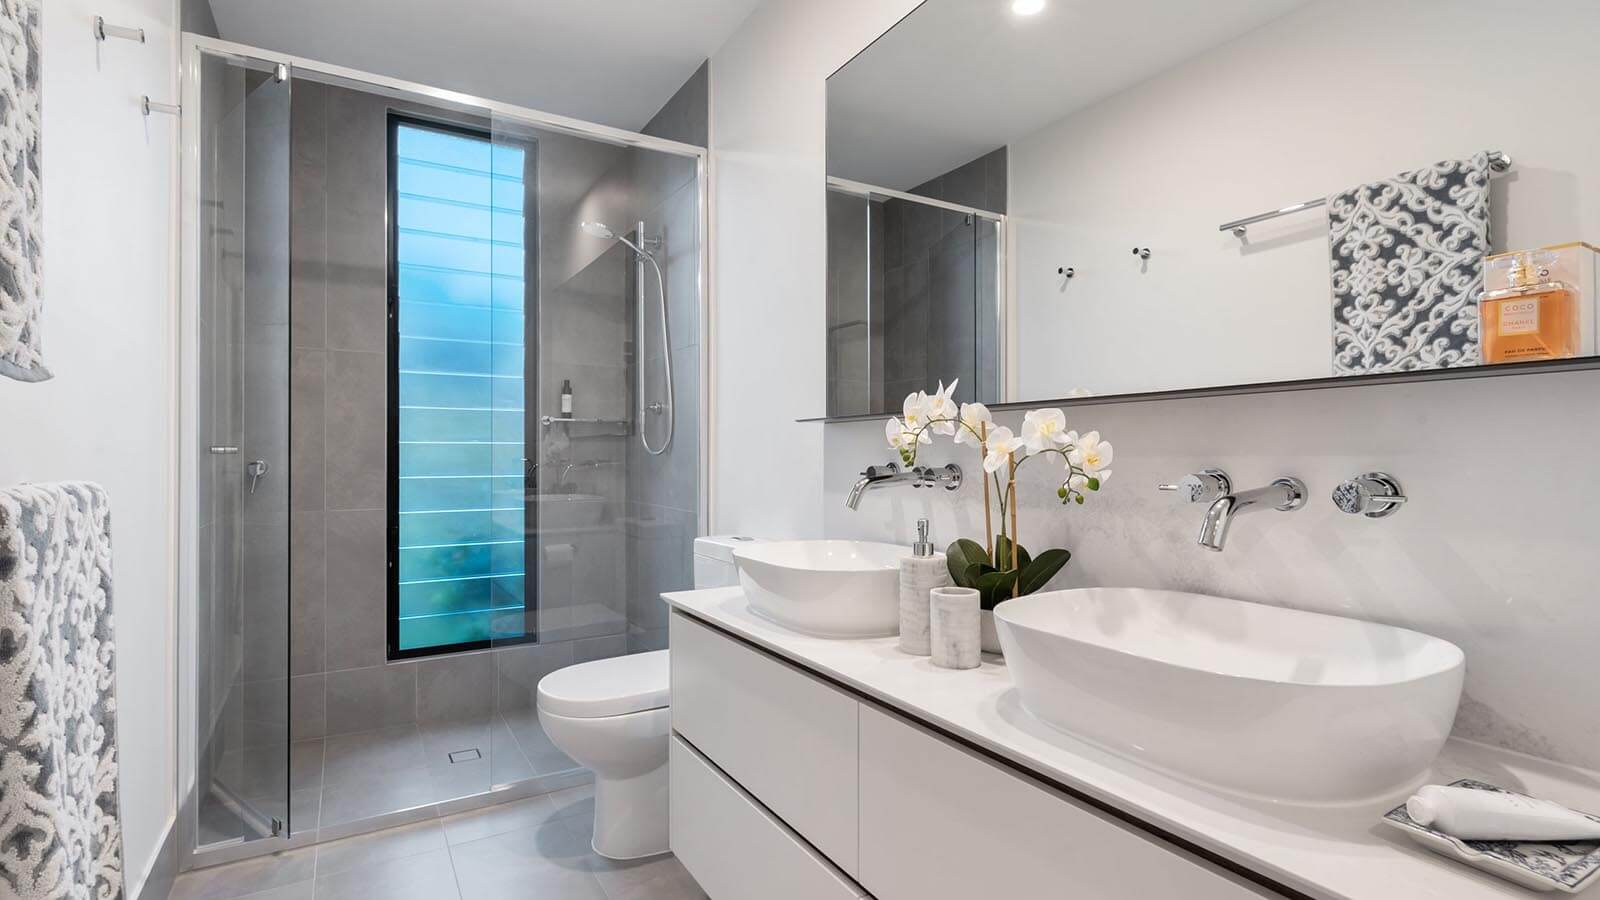 Photo of an elegantly designed bathroom with white orchids